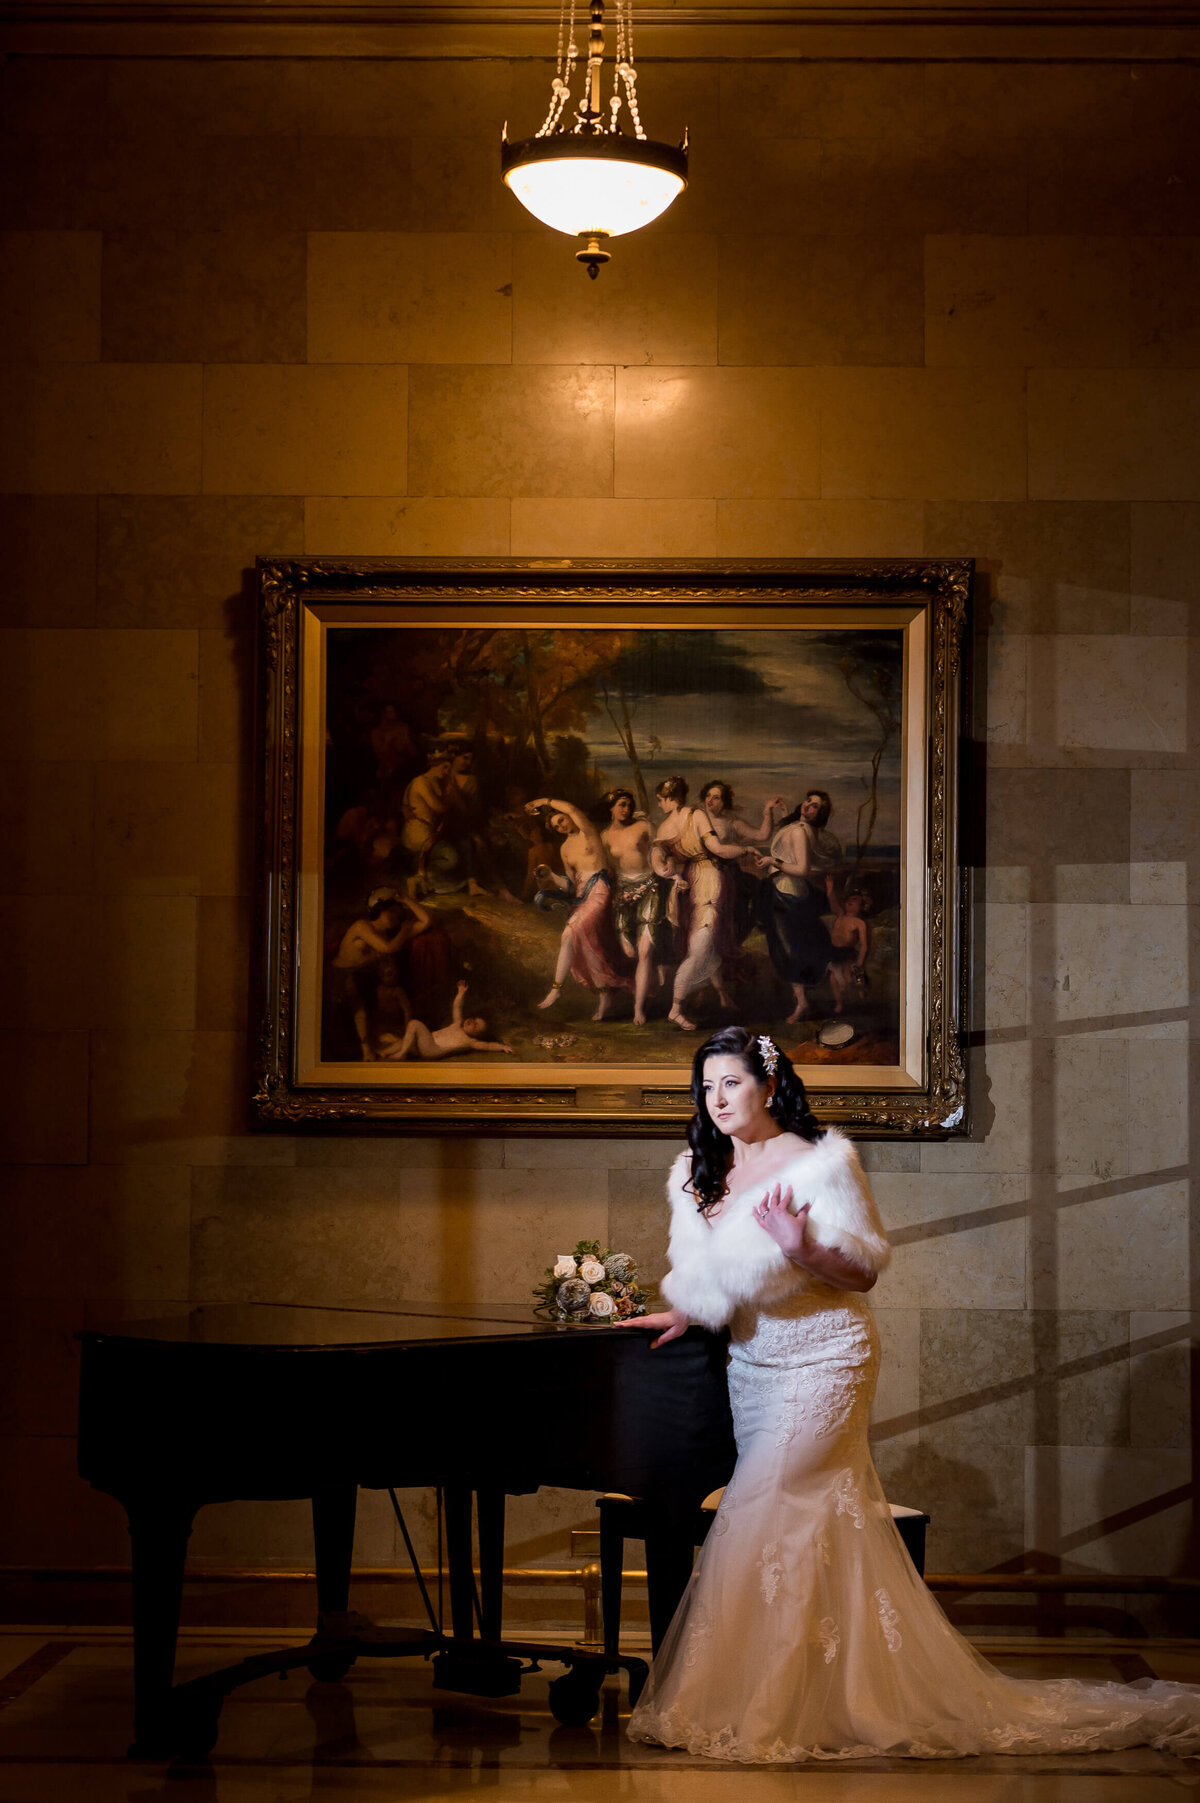 a stunning portrait of a bride standing near a grand piano in the Chateau Laurier venue taken by Ottawa wedding photographer JEMMAN Photography